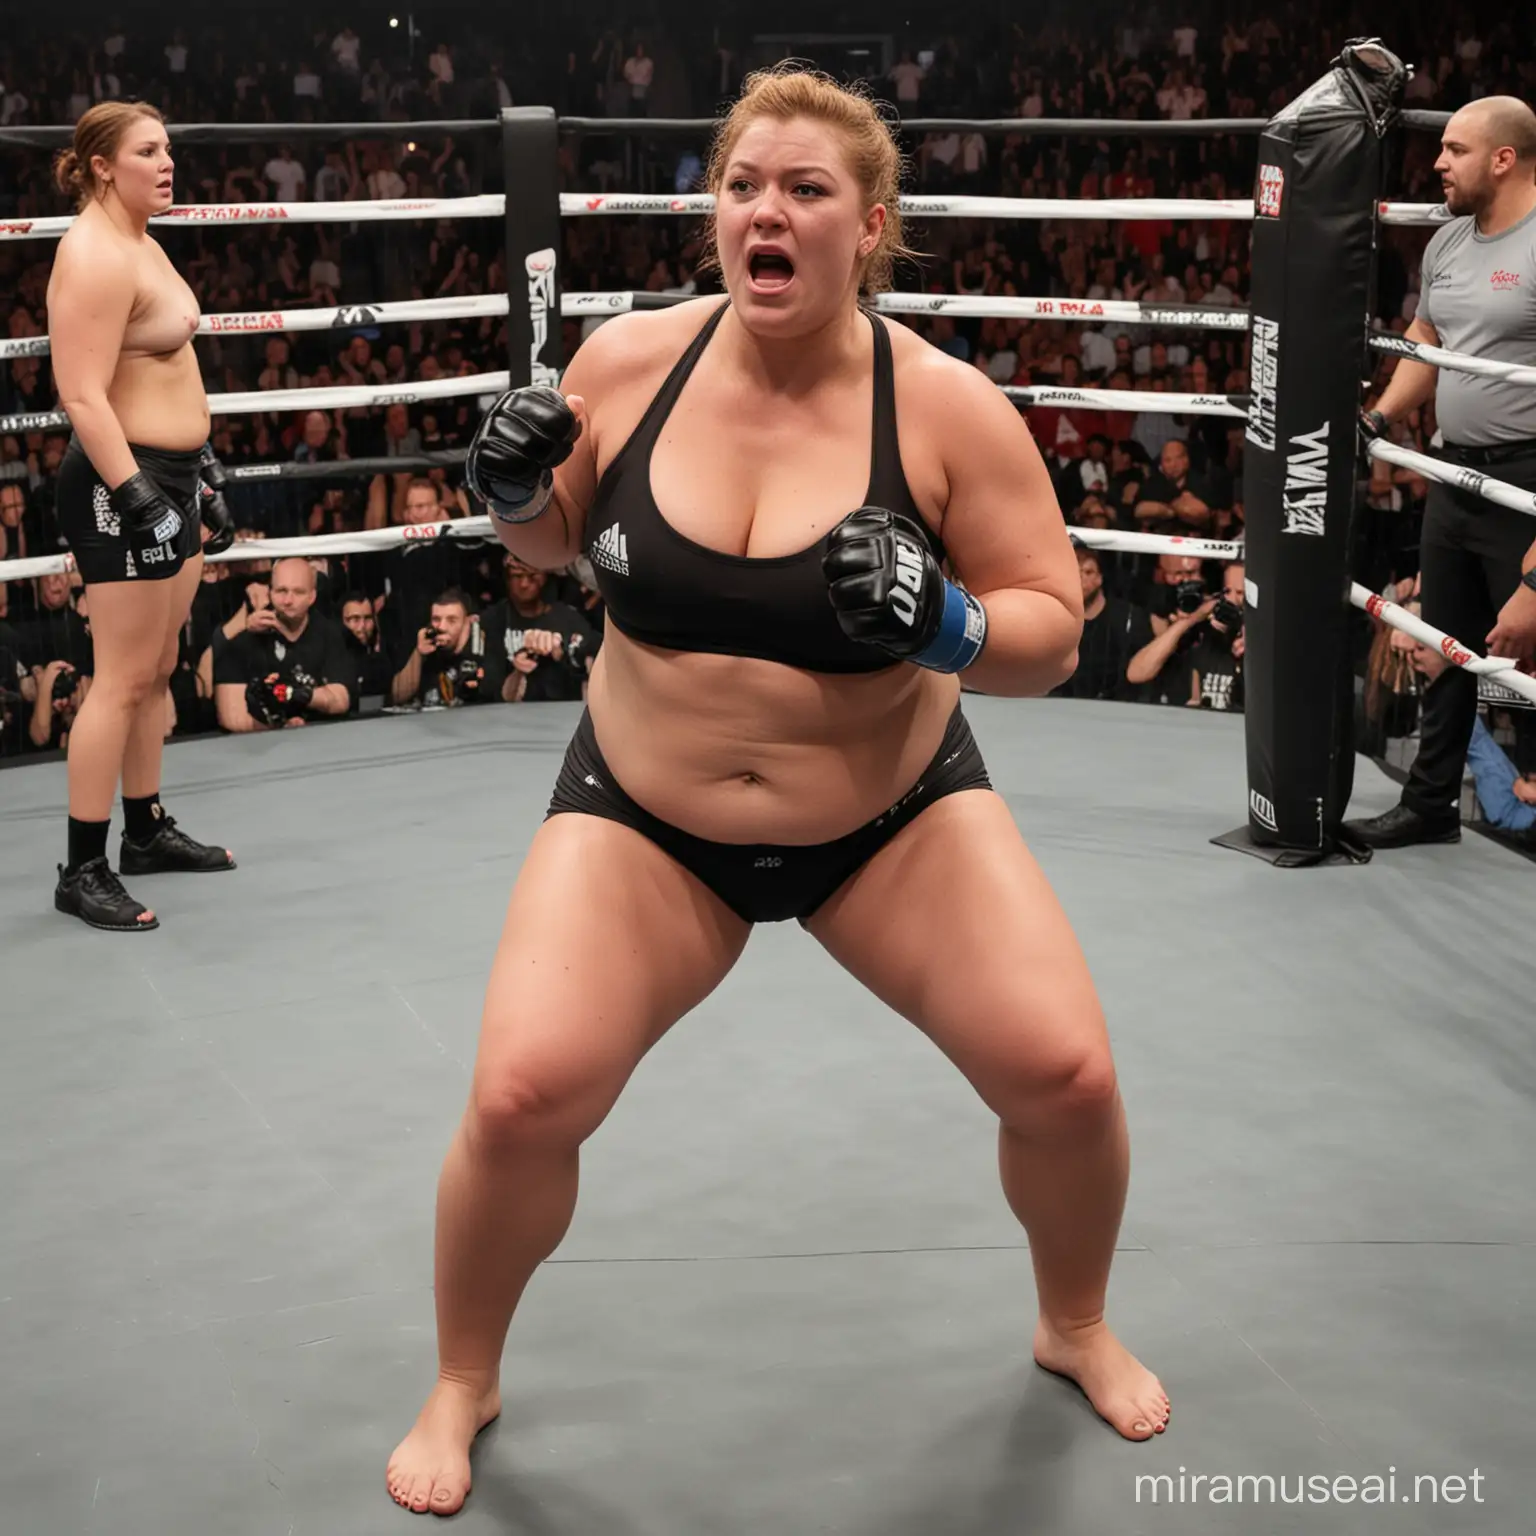 Overweight Woman Knocking Herself Out in MMA Ring